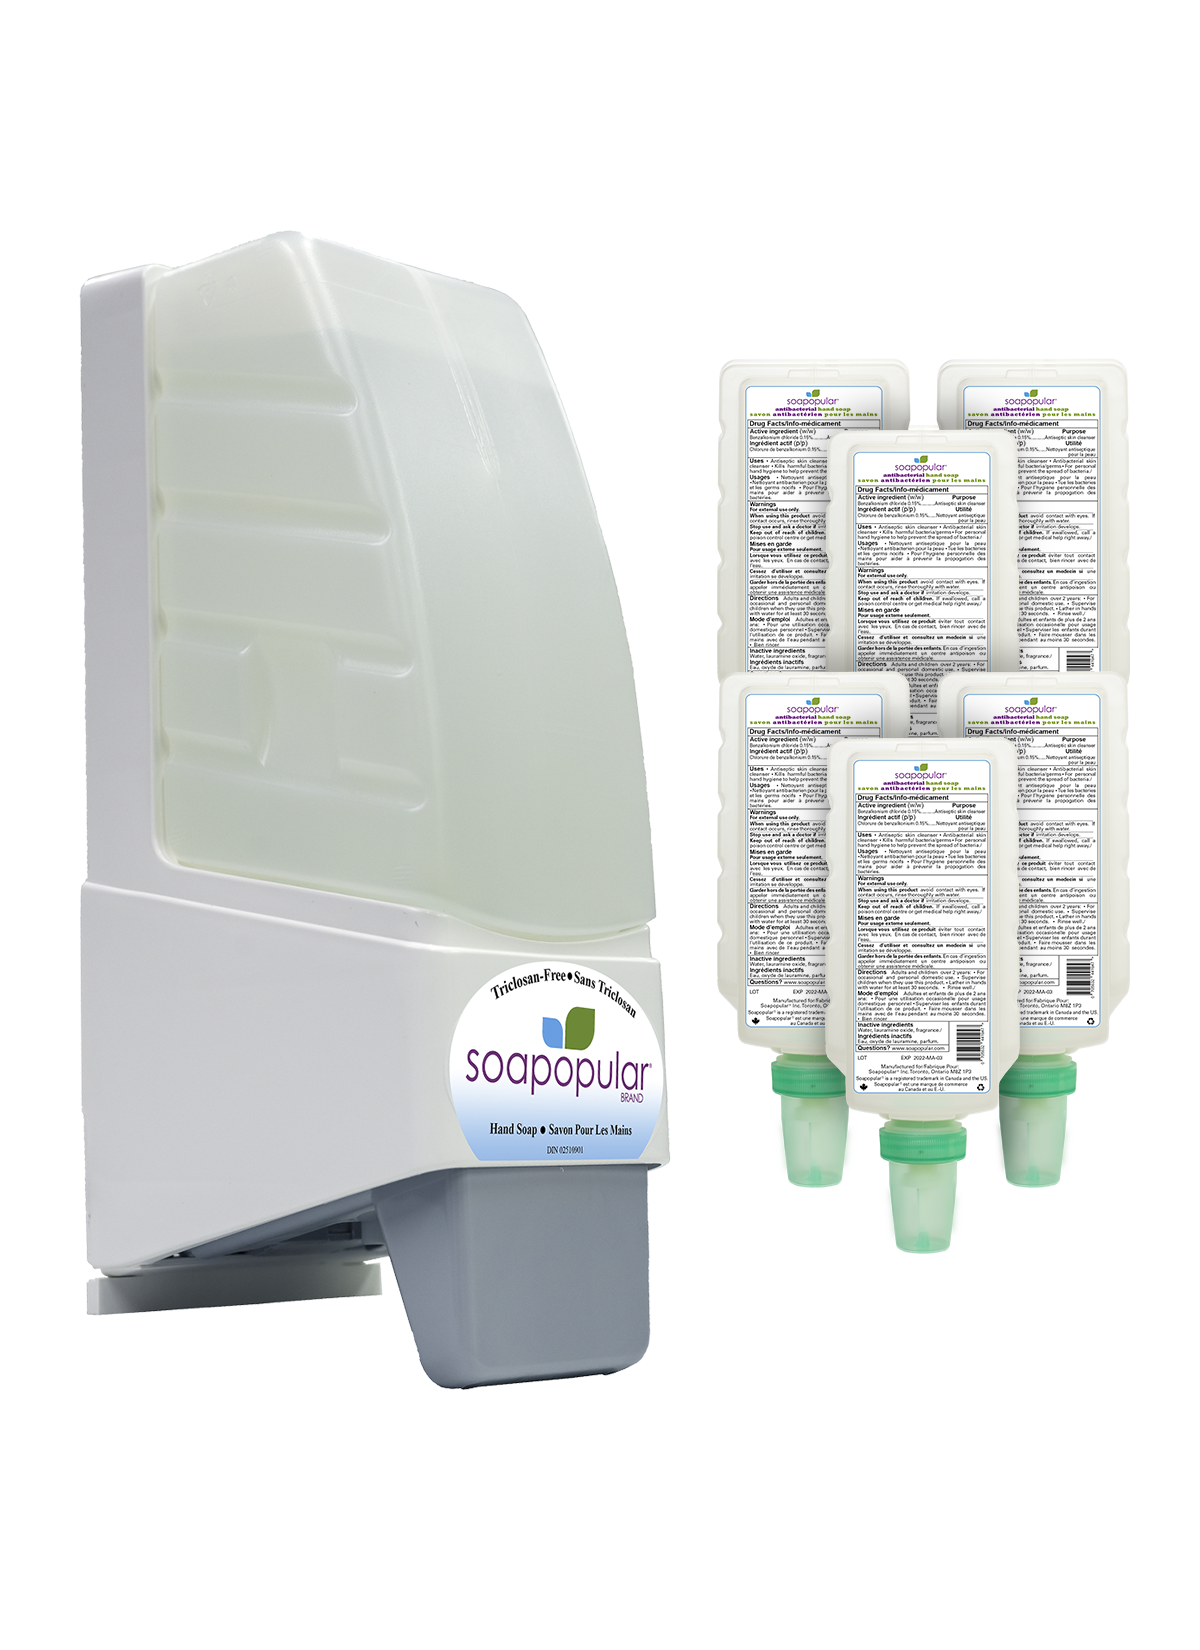 Soapopular® Triclosan-Free No-Cover Manual Dispenser + Refill Package